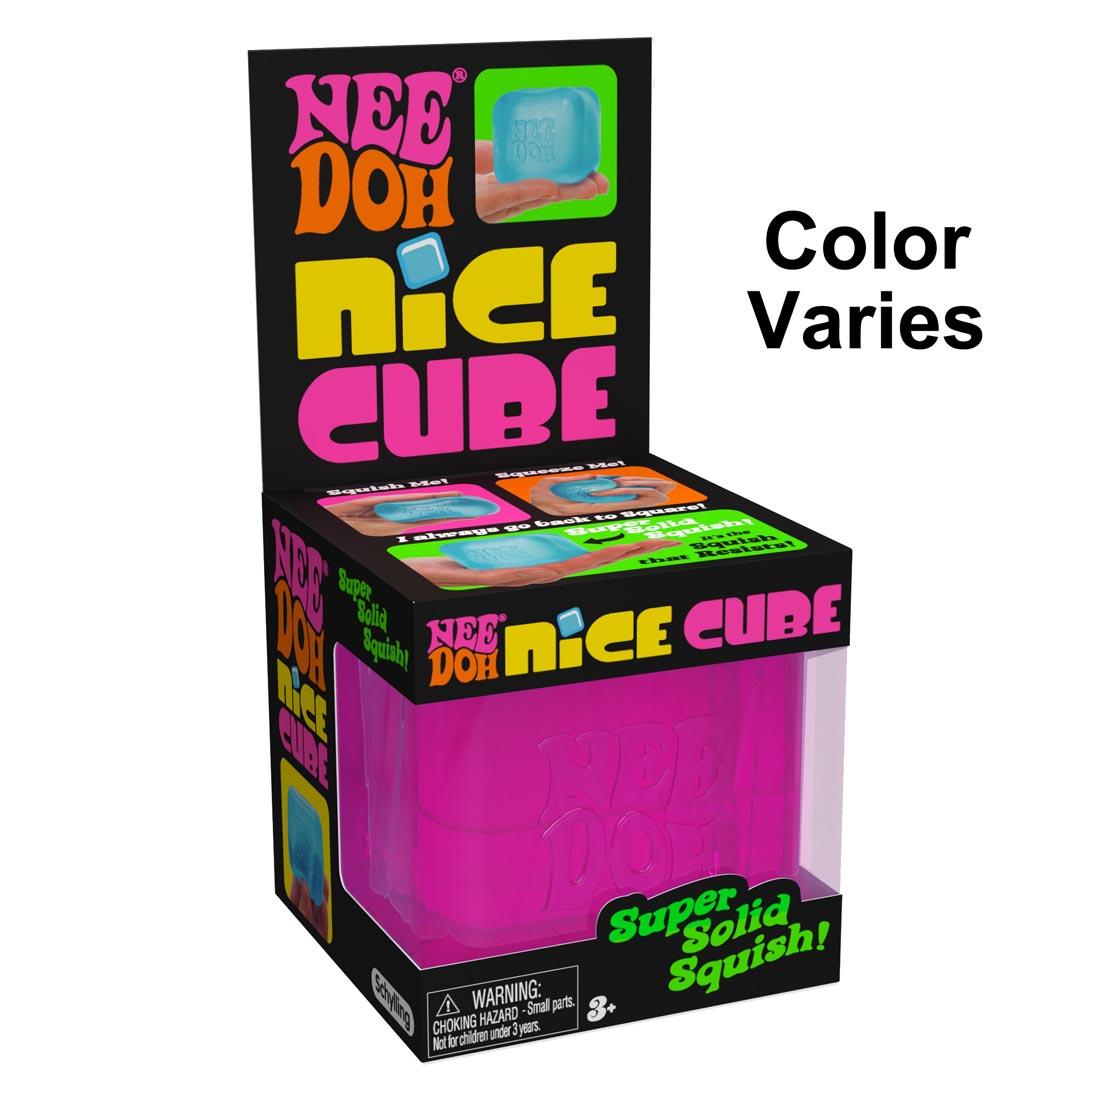 Nee Doh Nice Cube, with the words "colors vary"